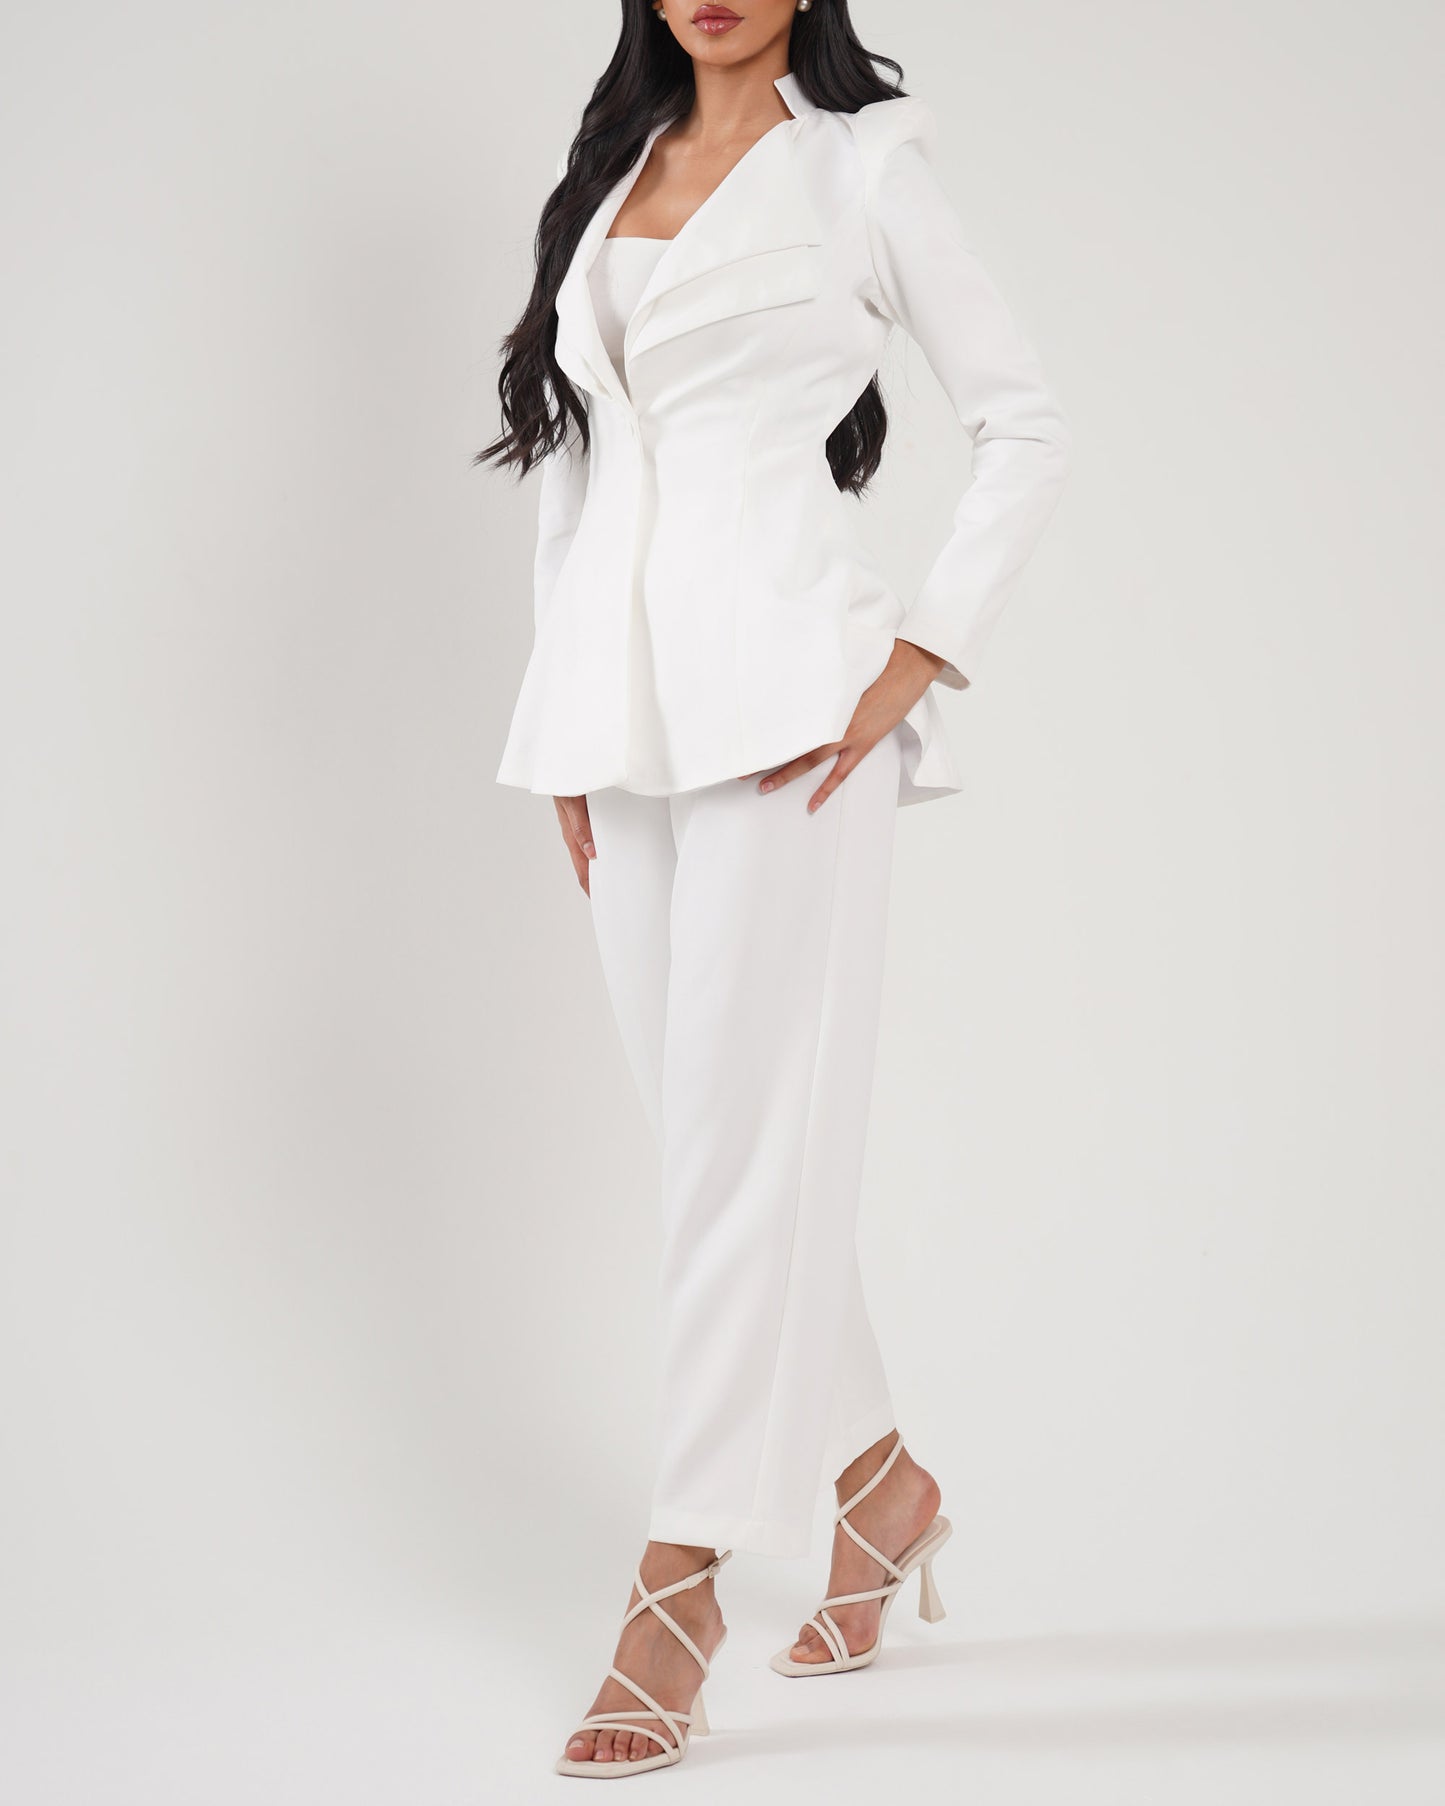 Milk White Pointed shoulder double collar blazer paired with straight leg trousers